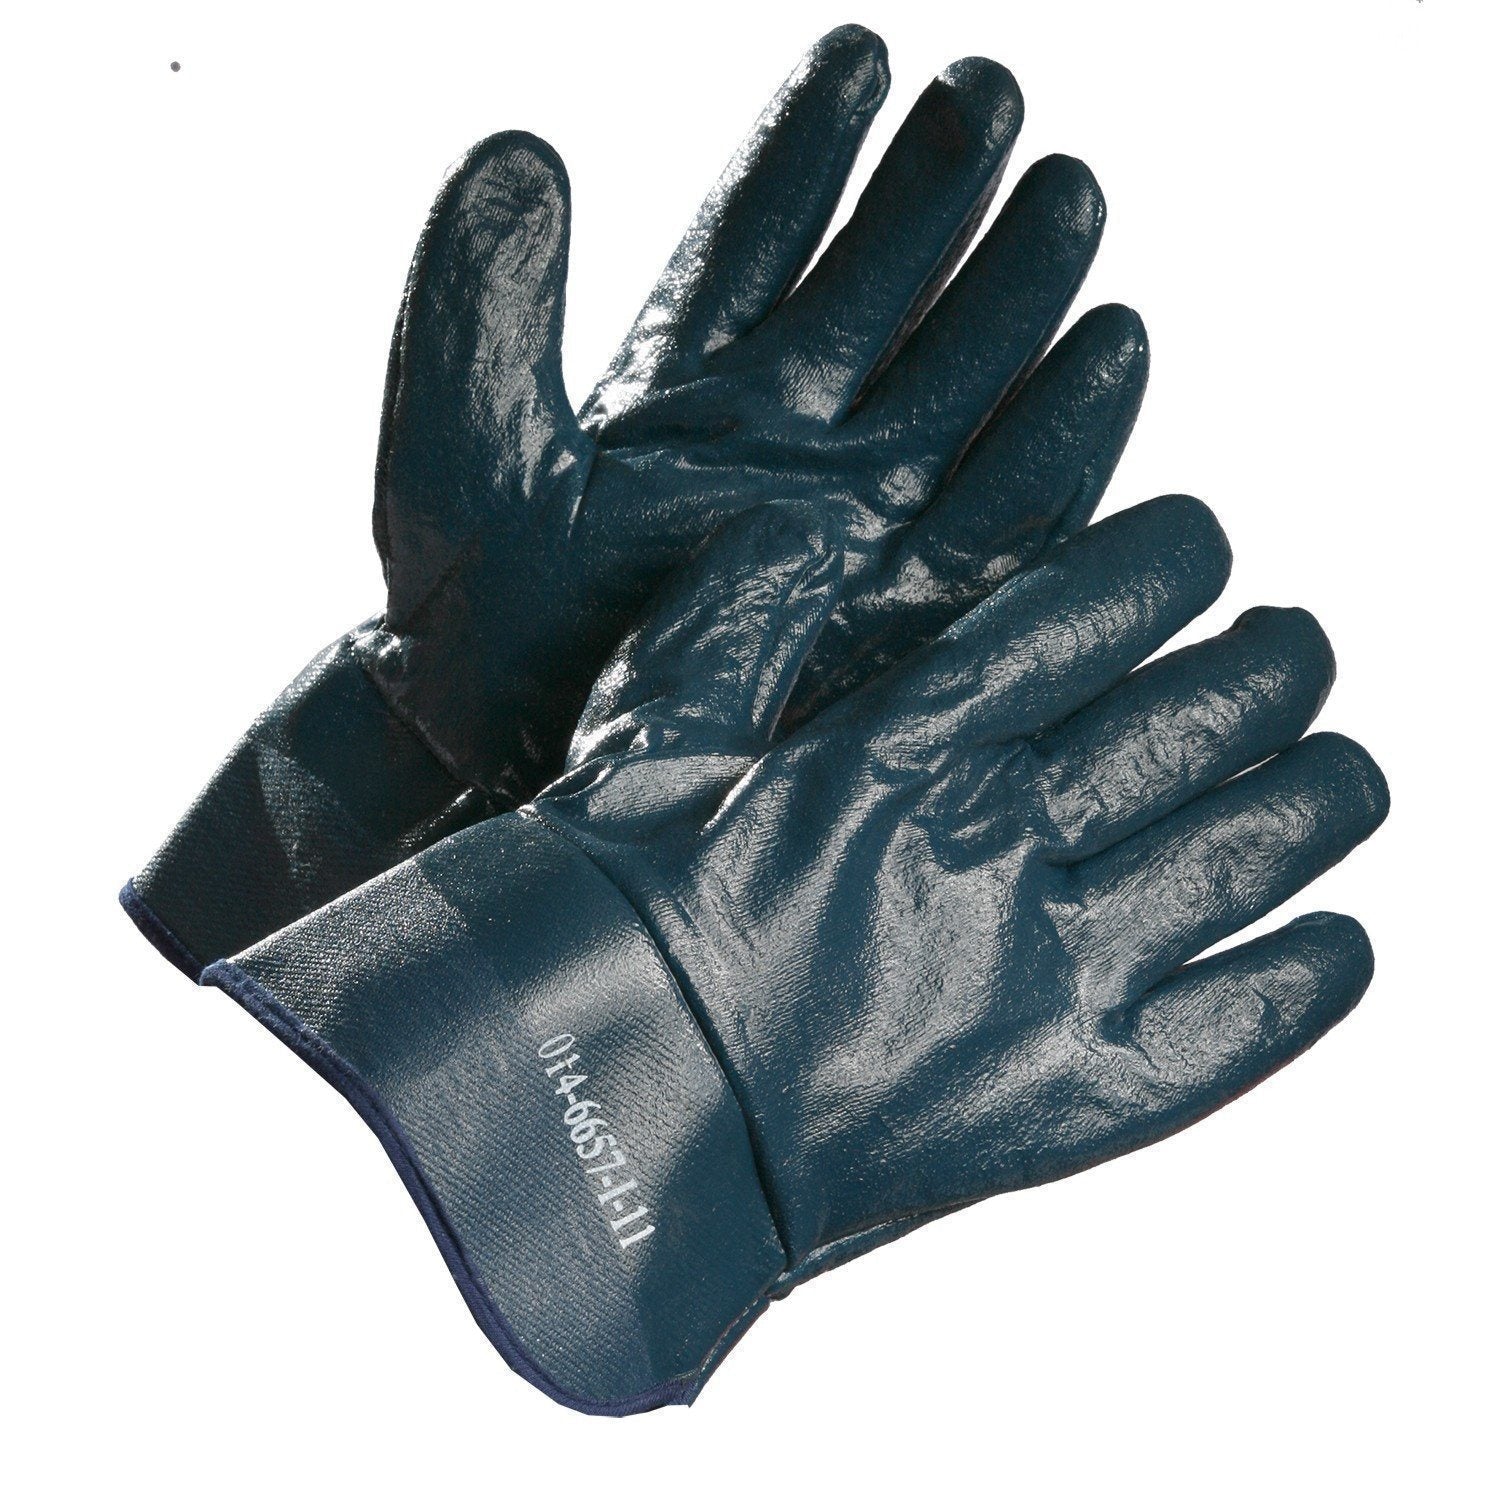 Winter Insulated Nitrile Coated Work Gloves, Safety Cuff